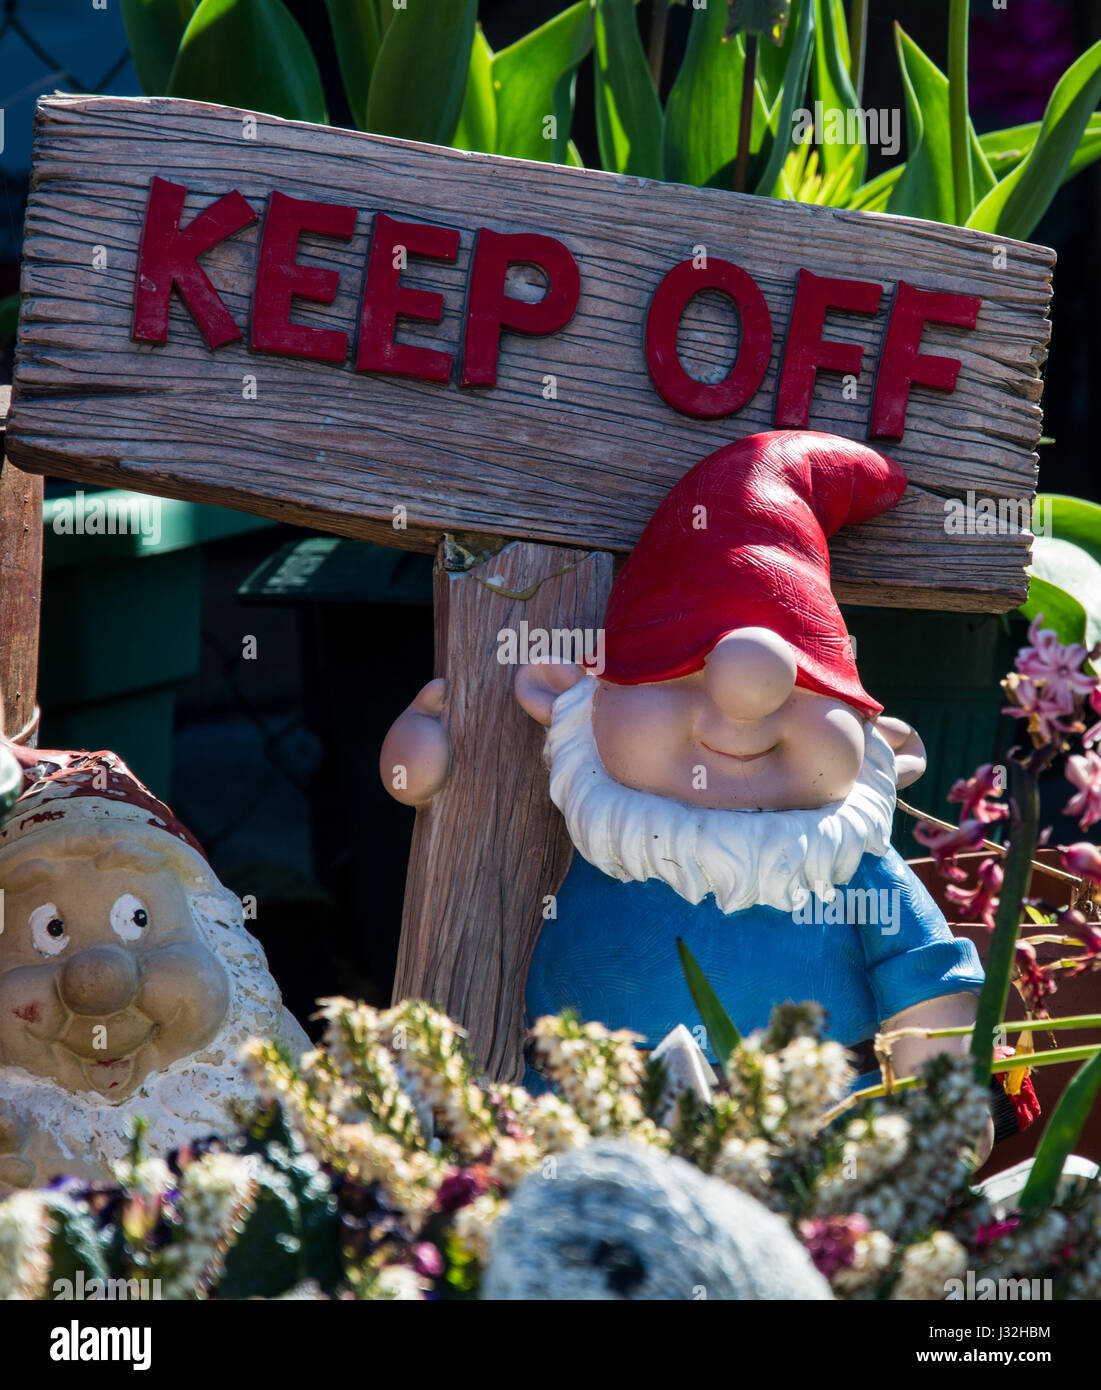 A dwarf garden gnome holding a sign that says 'Keep Off'. Lighthearted garden ornament.  Could represent the idea of privacy  - online or otherwise. Stock Photo